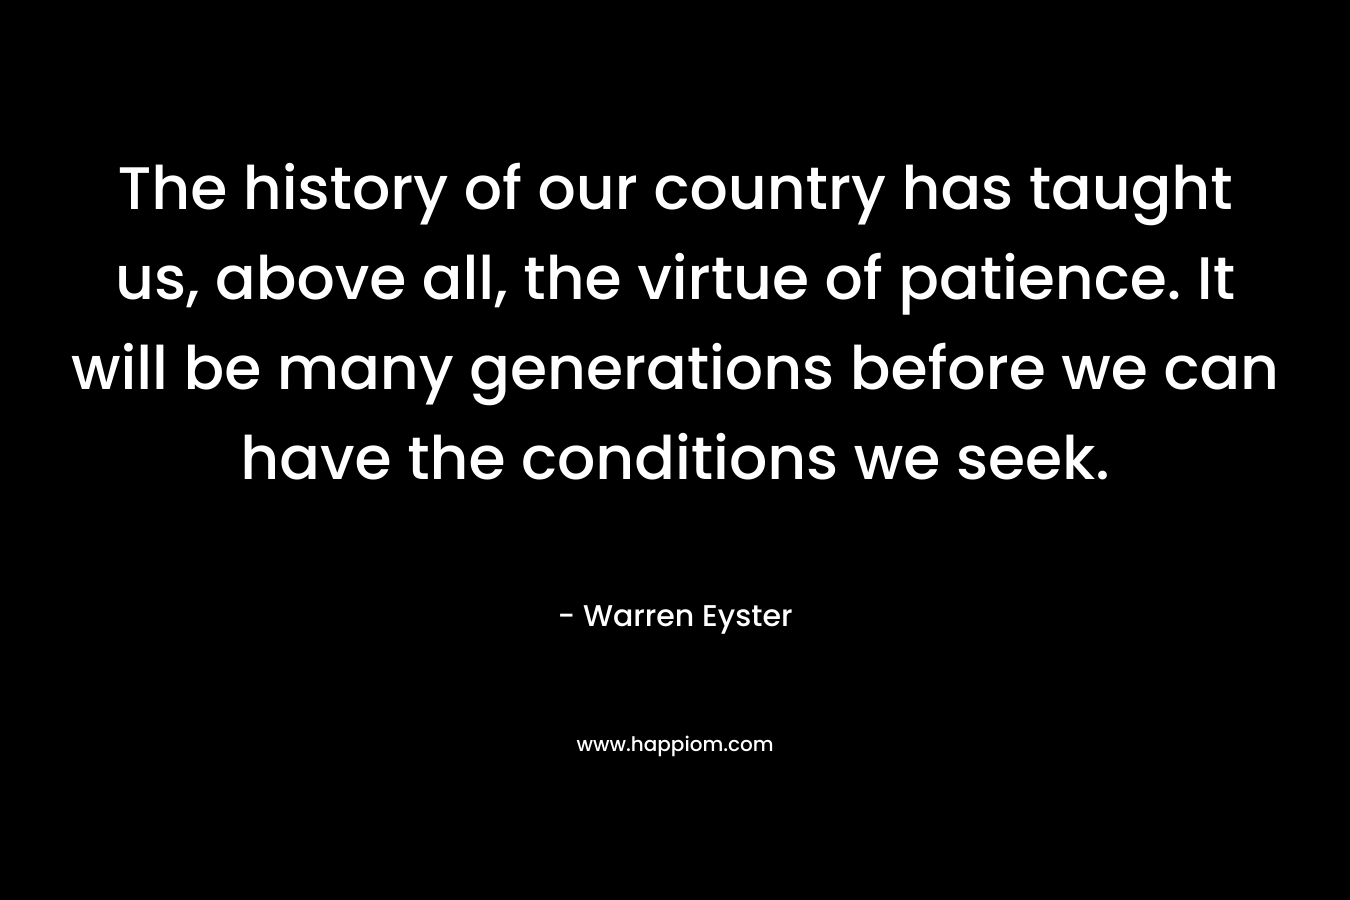 The history of our country has taught us, above all, the virtue of patience. It will be many generations before we can have the conditions we seek.